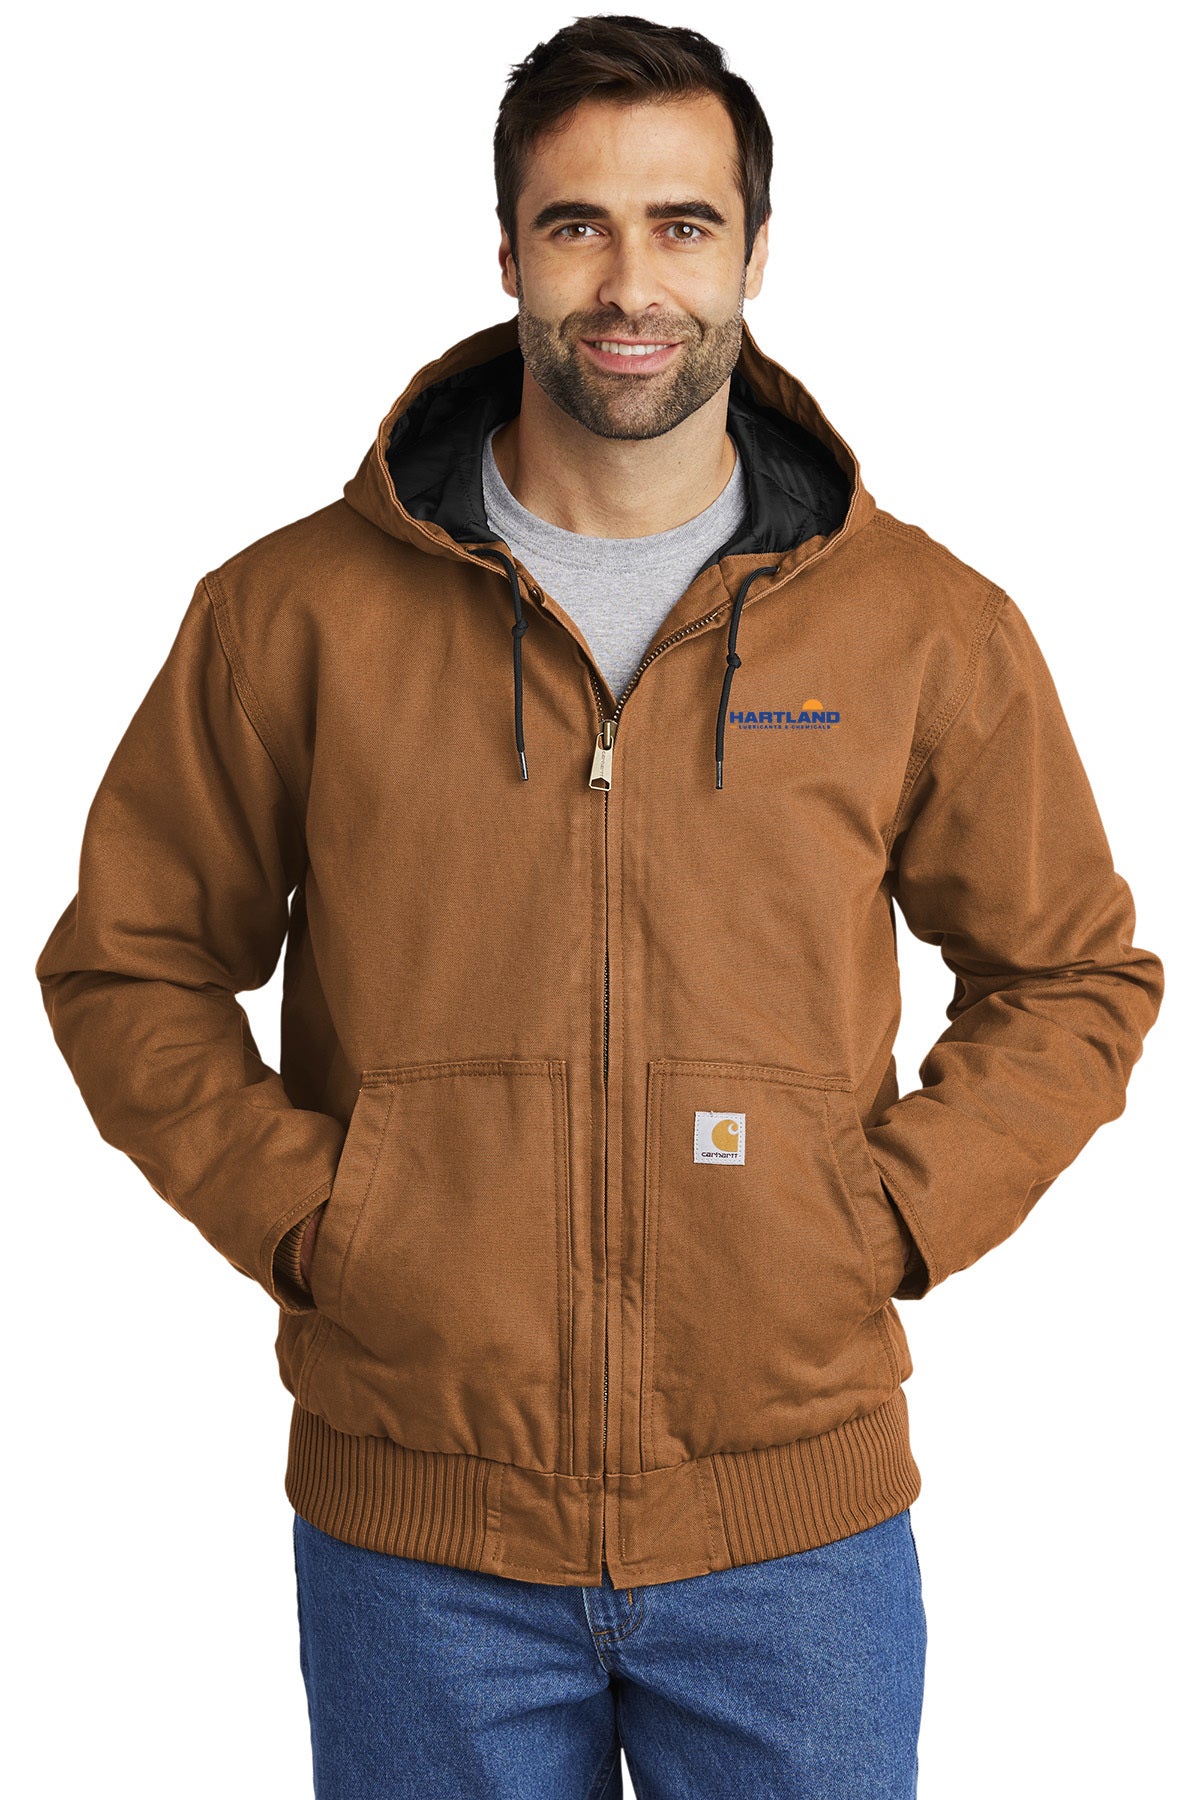 Hartland Lubricants and Chemicals Carhartt® Jacket